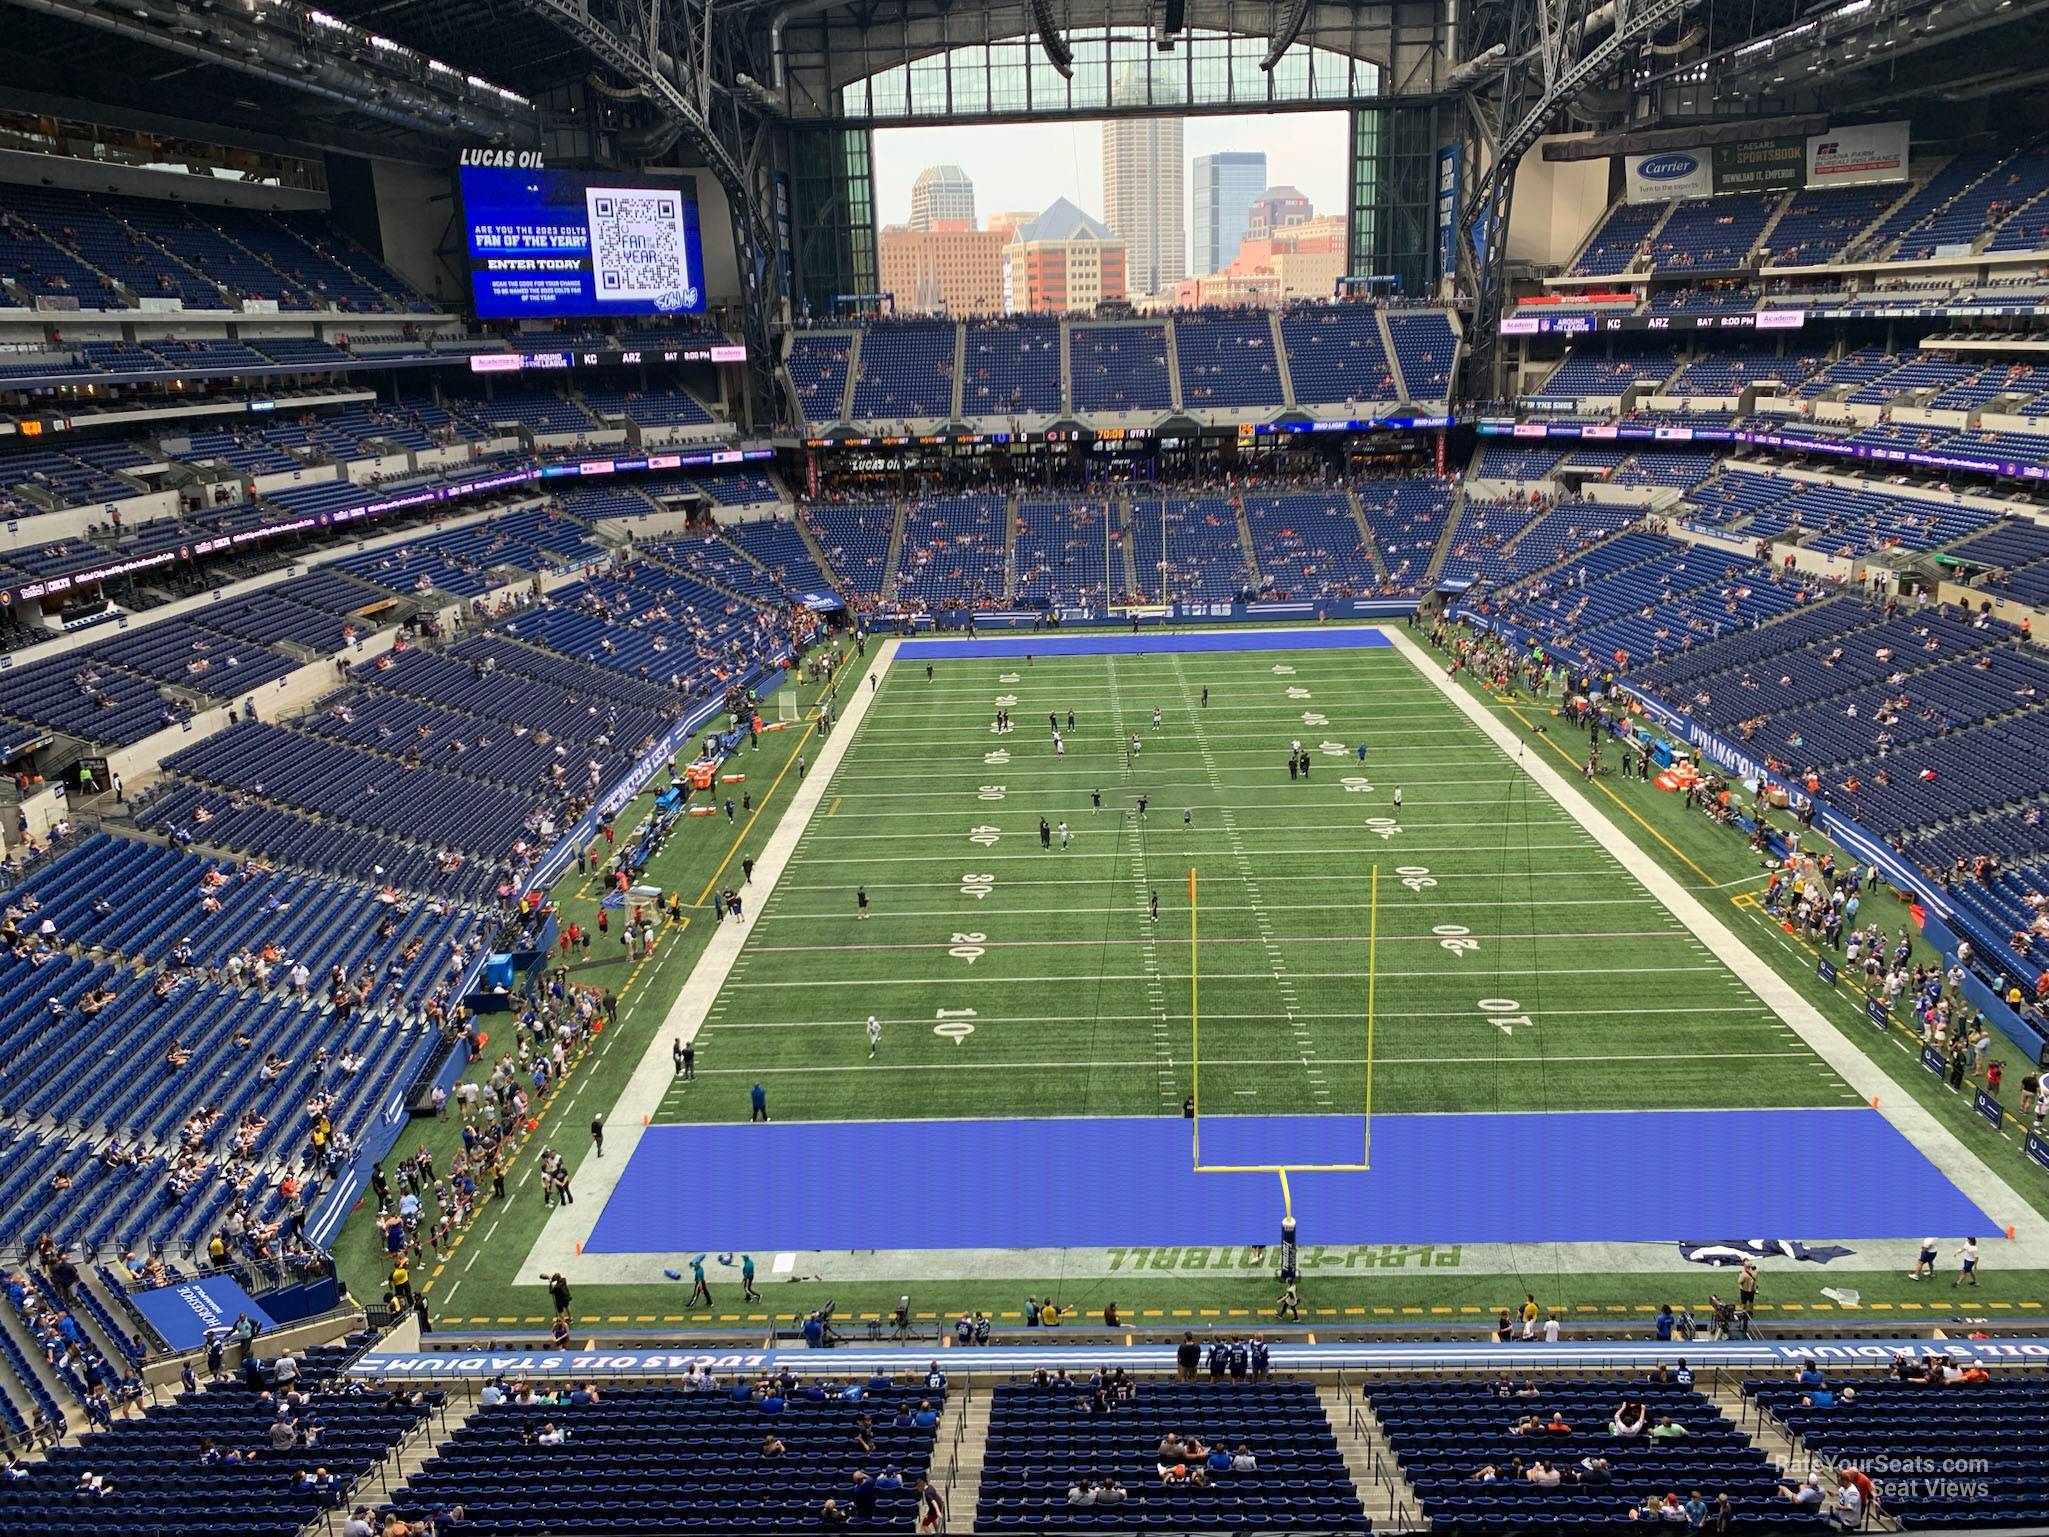 section 527, row 2 seat view  for football - lucas oil stadium